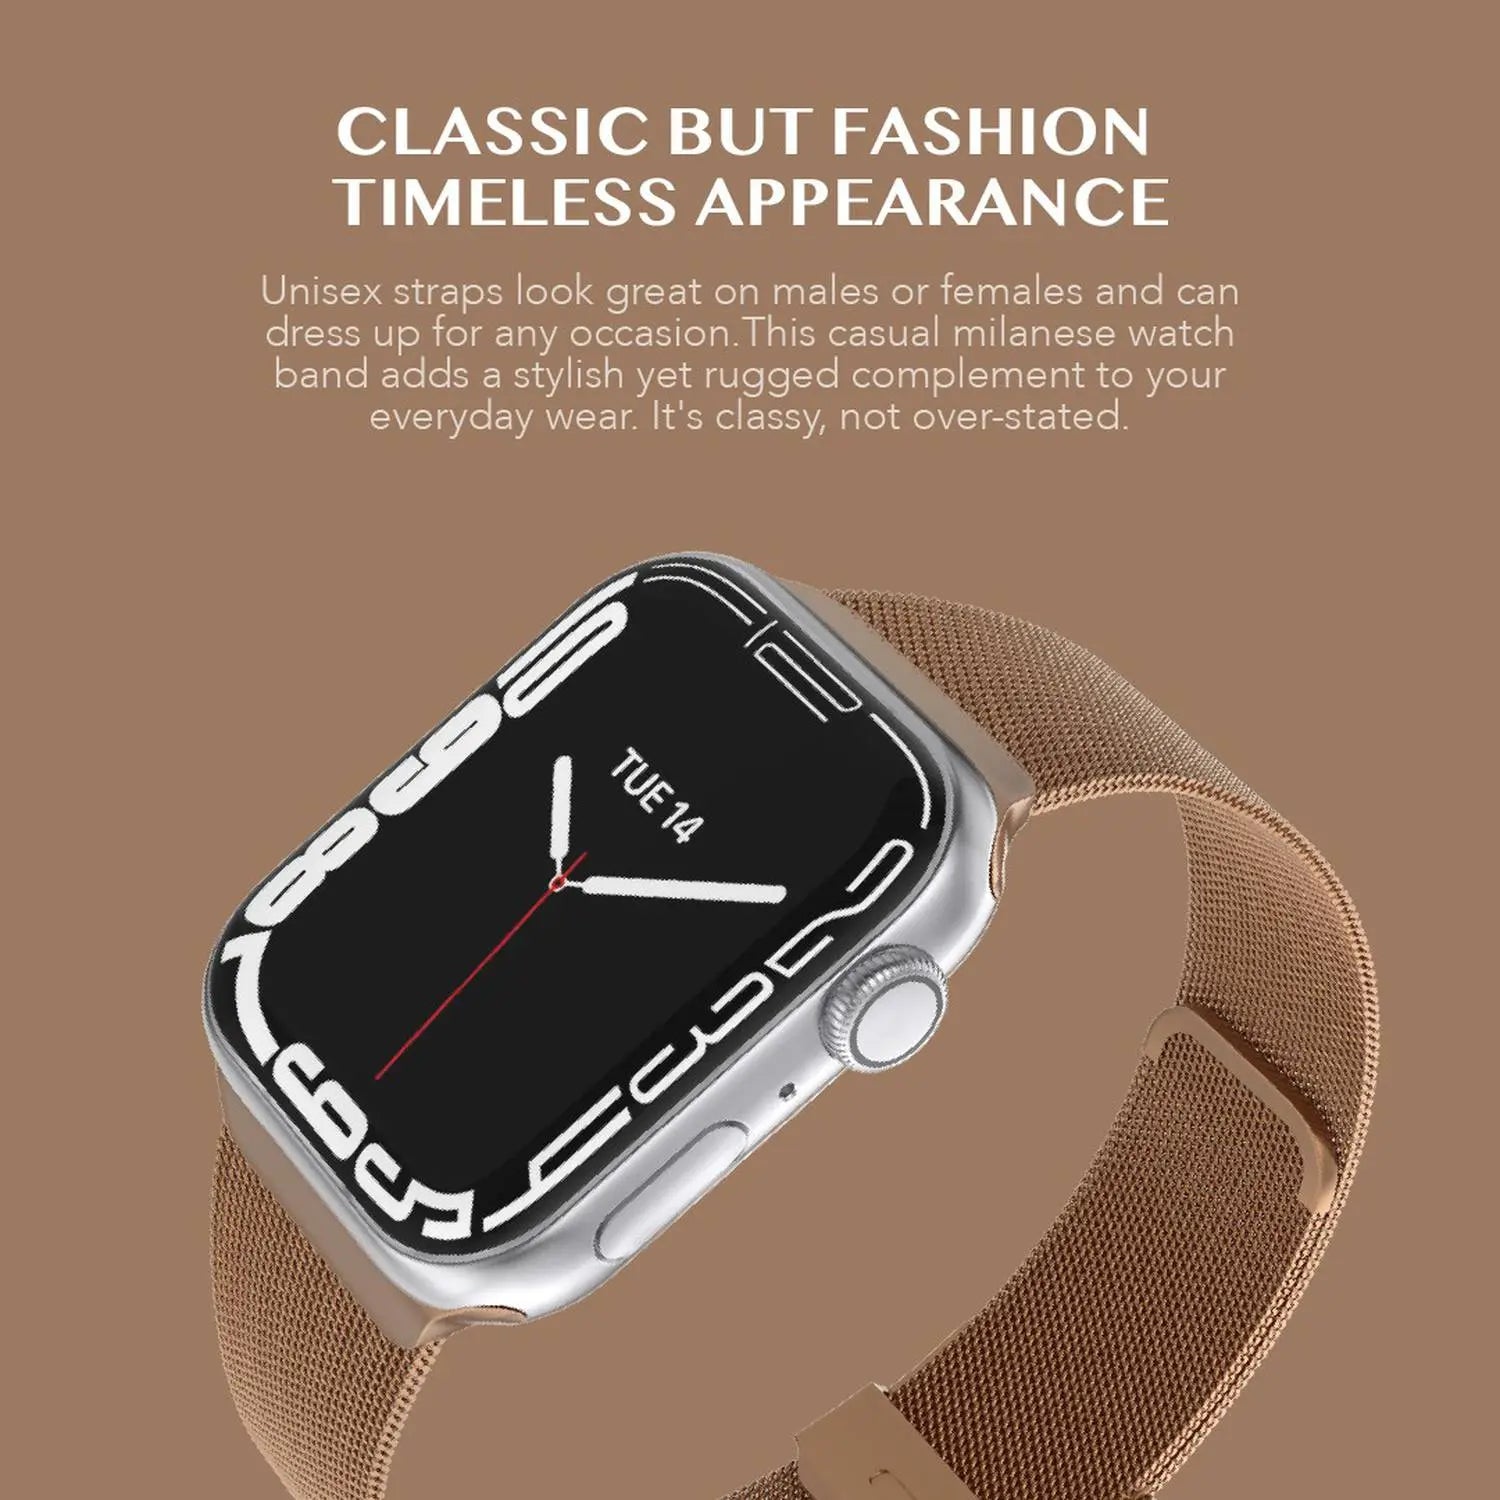 Levelo Double Milanese Strap Apple Watch 42/44/45mm